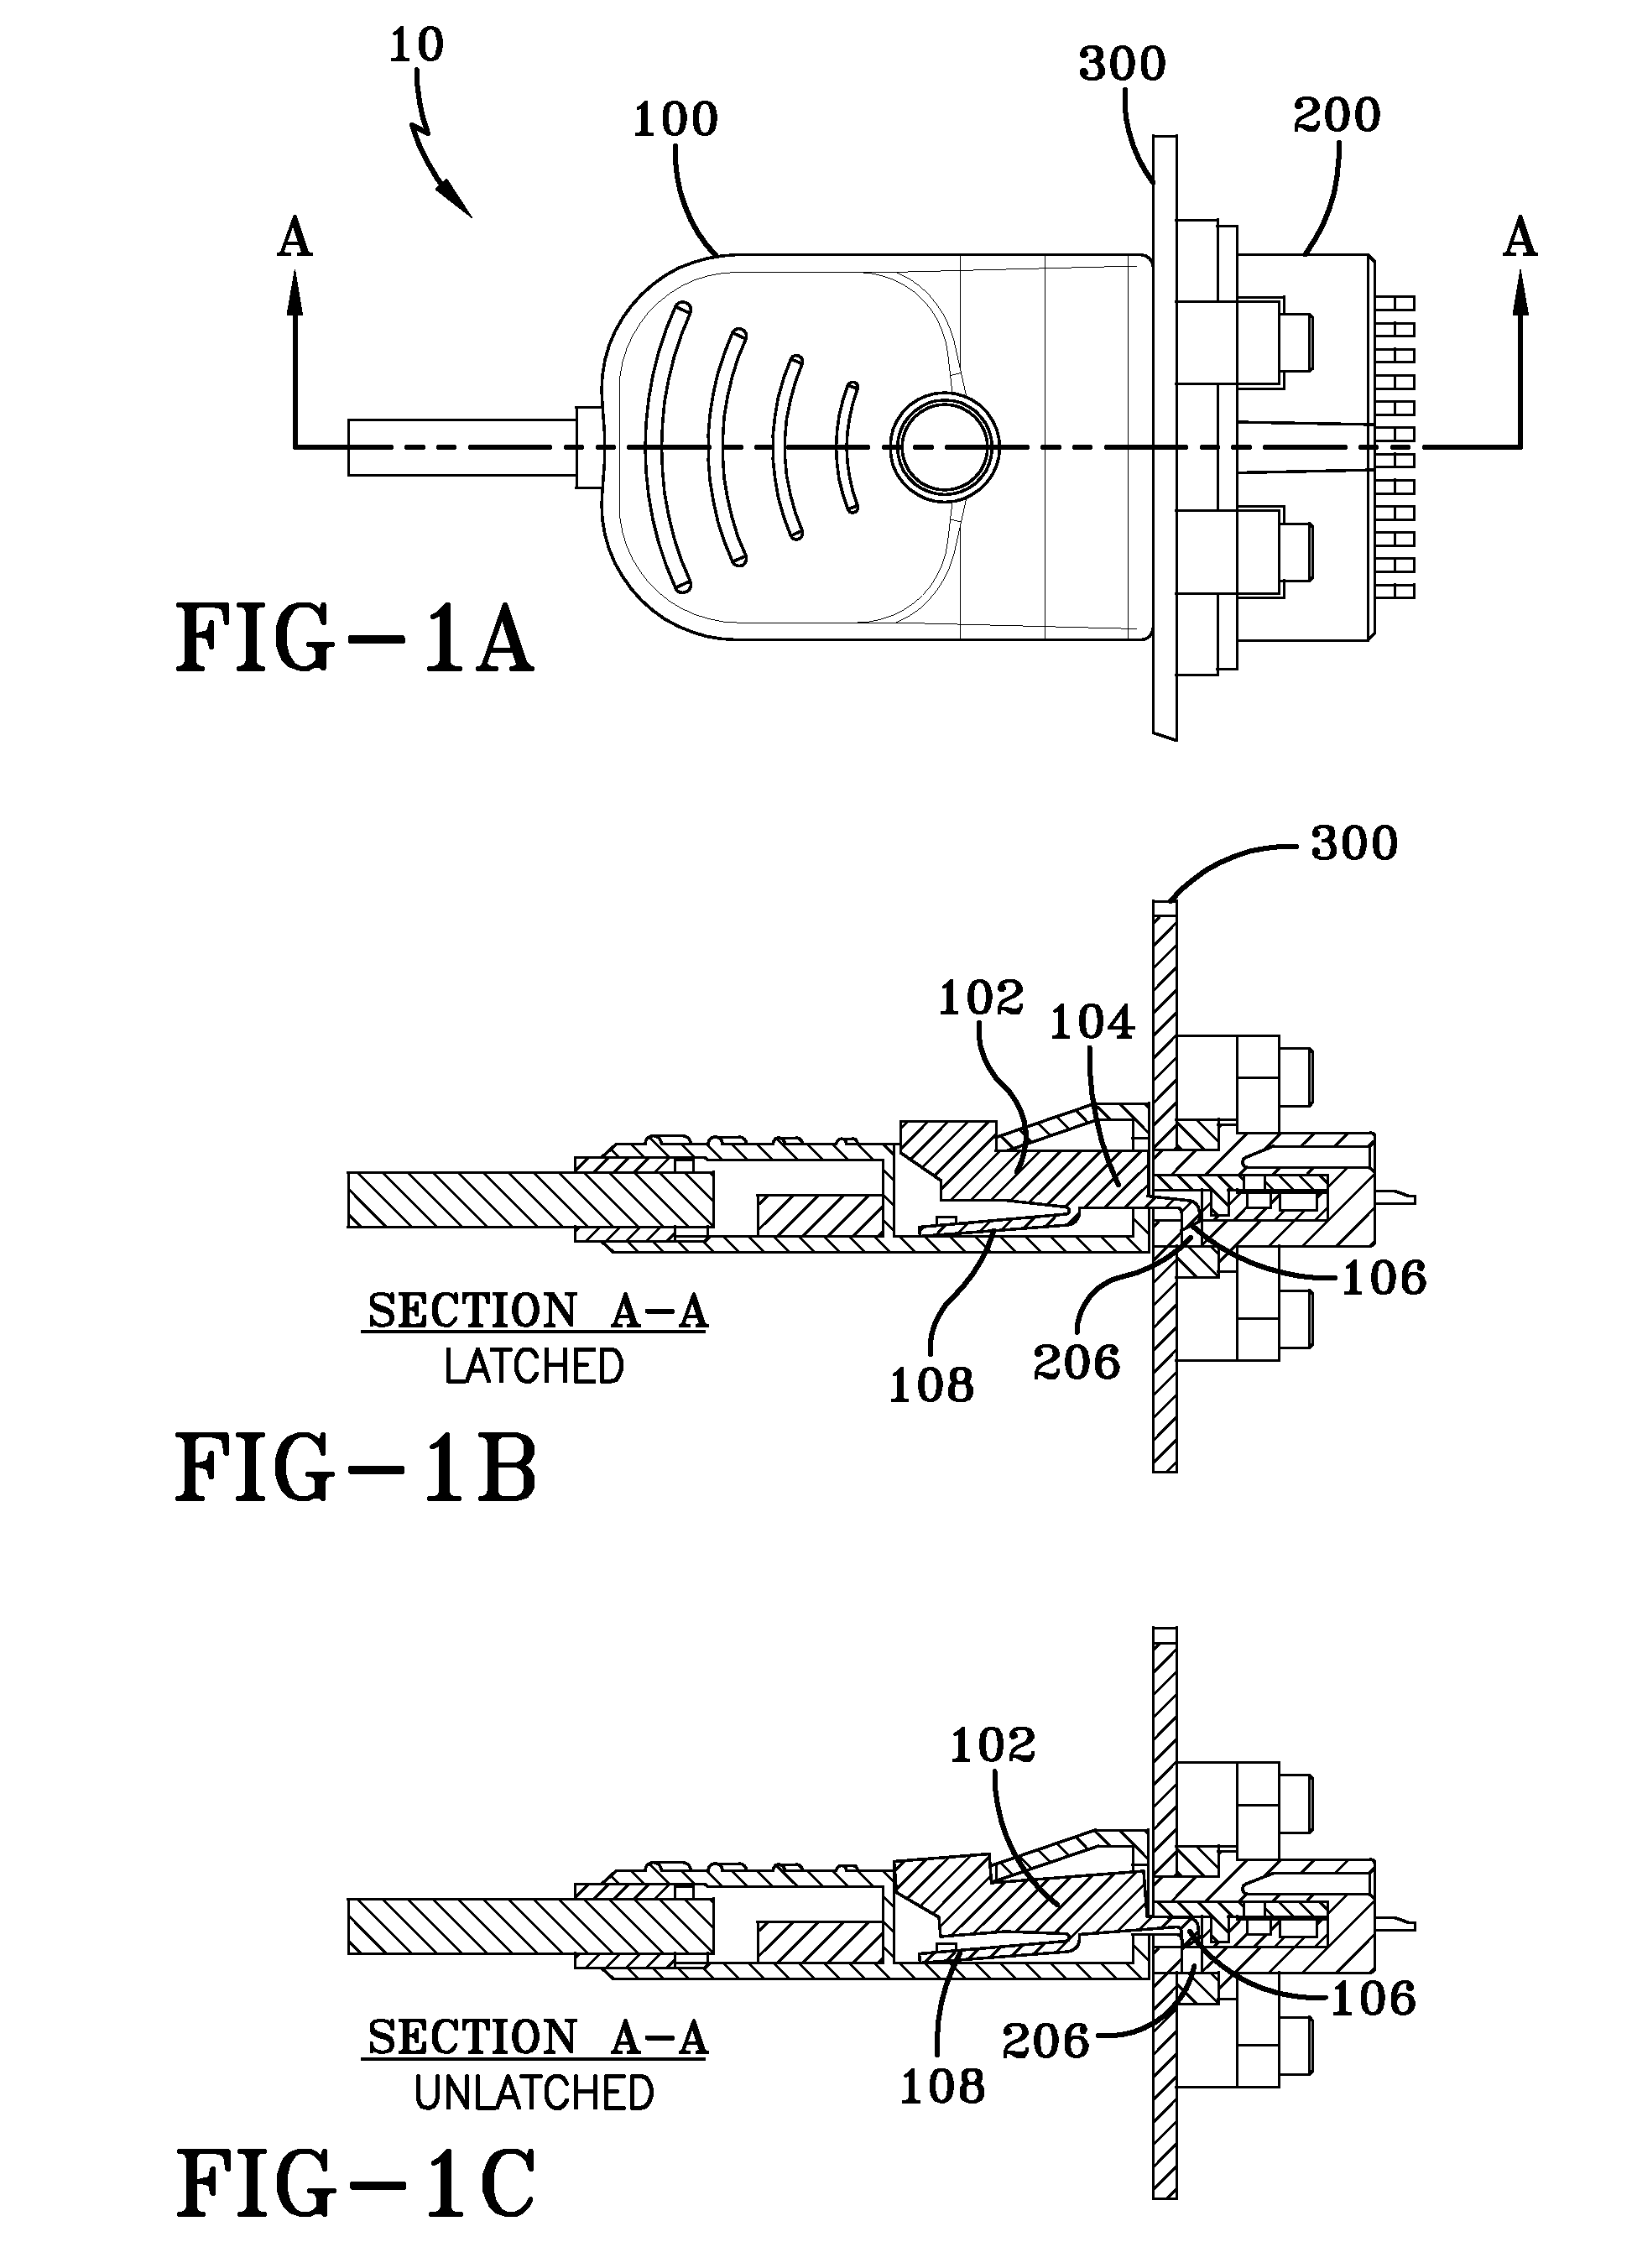 Plug connector for use with a receptacle